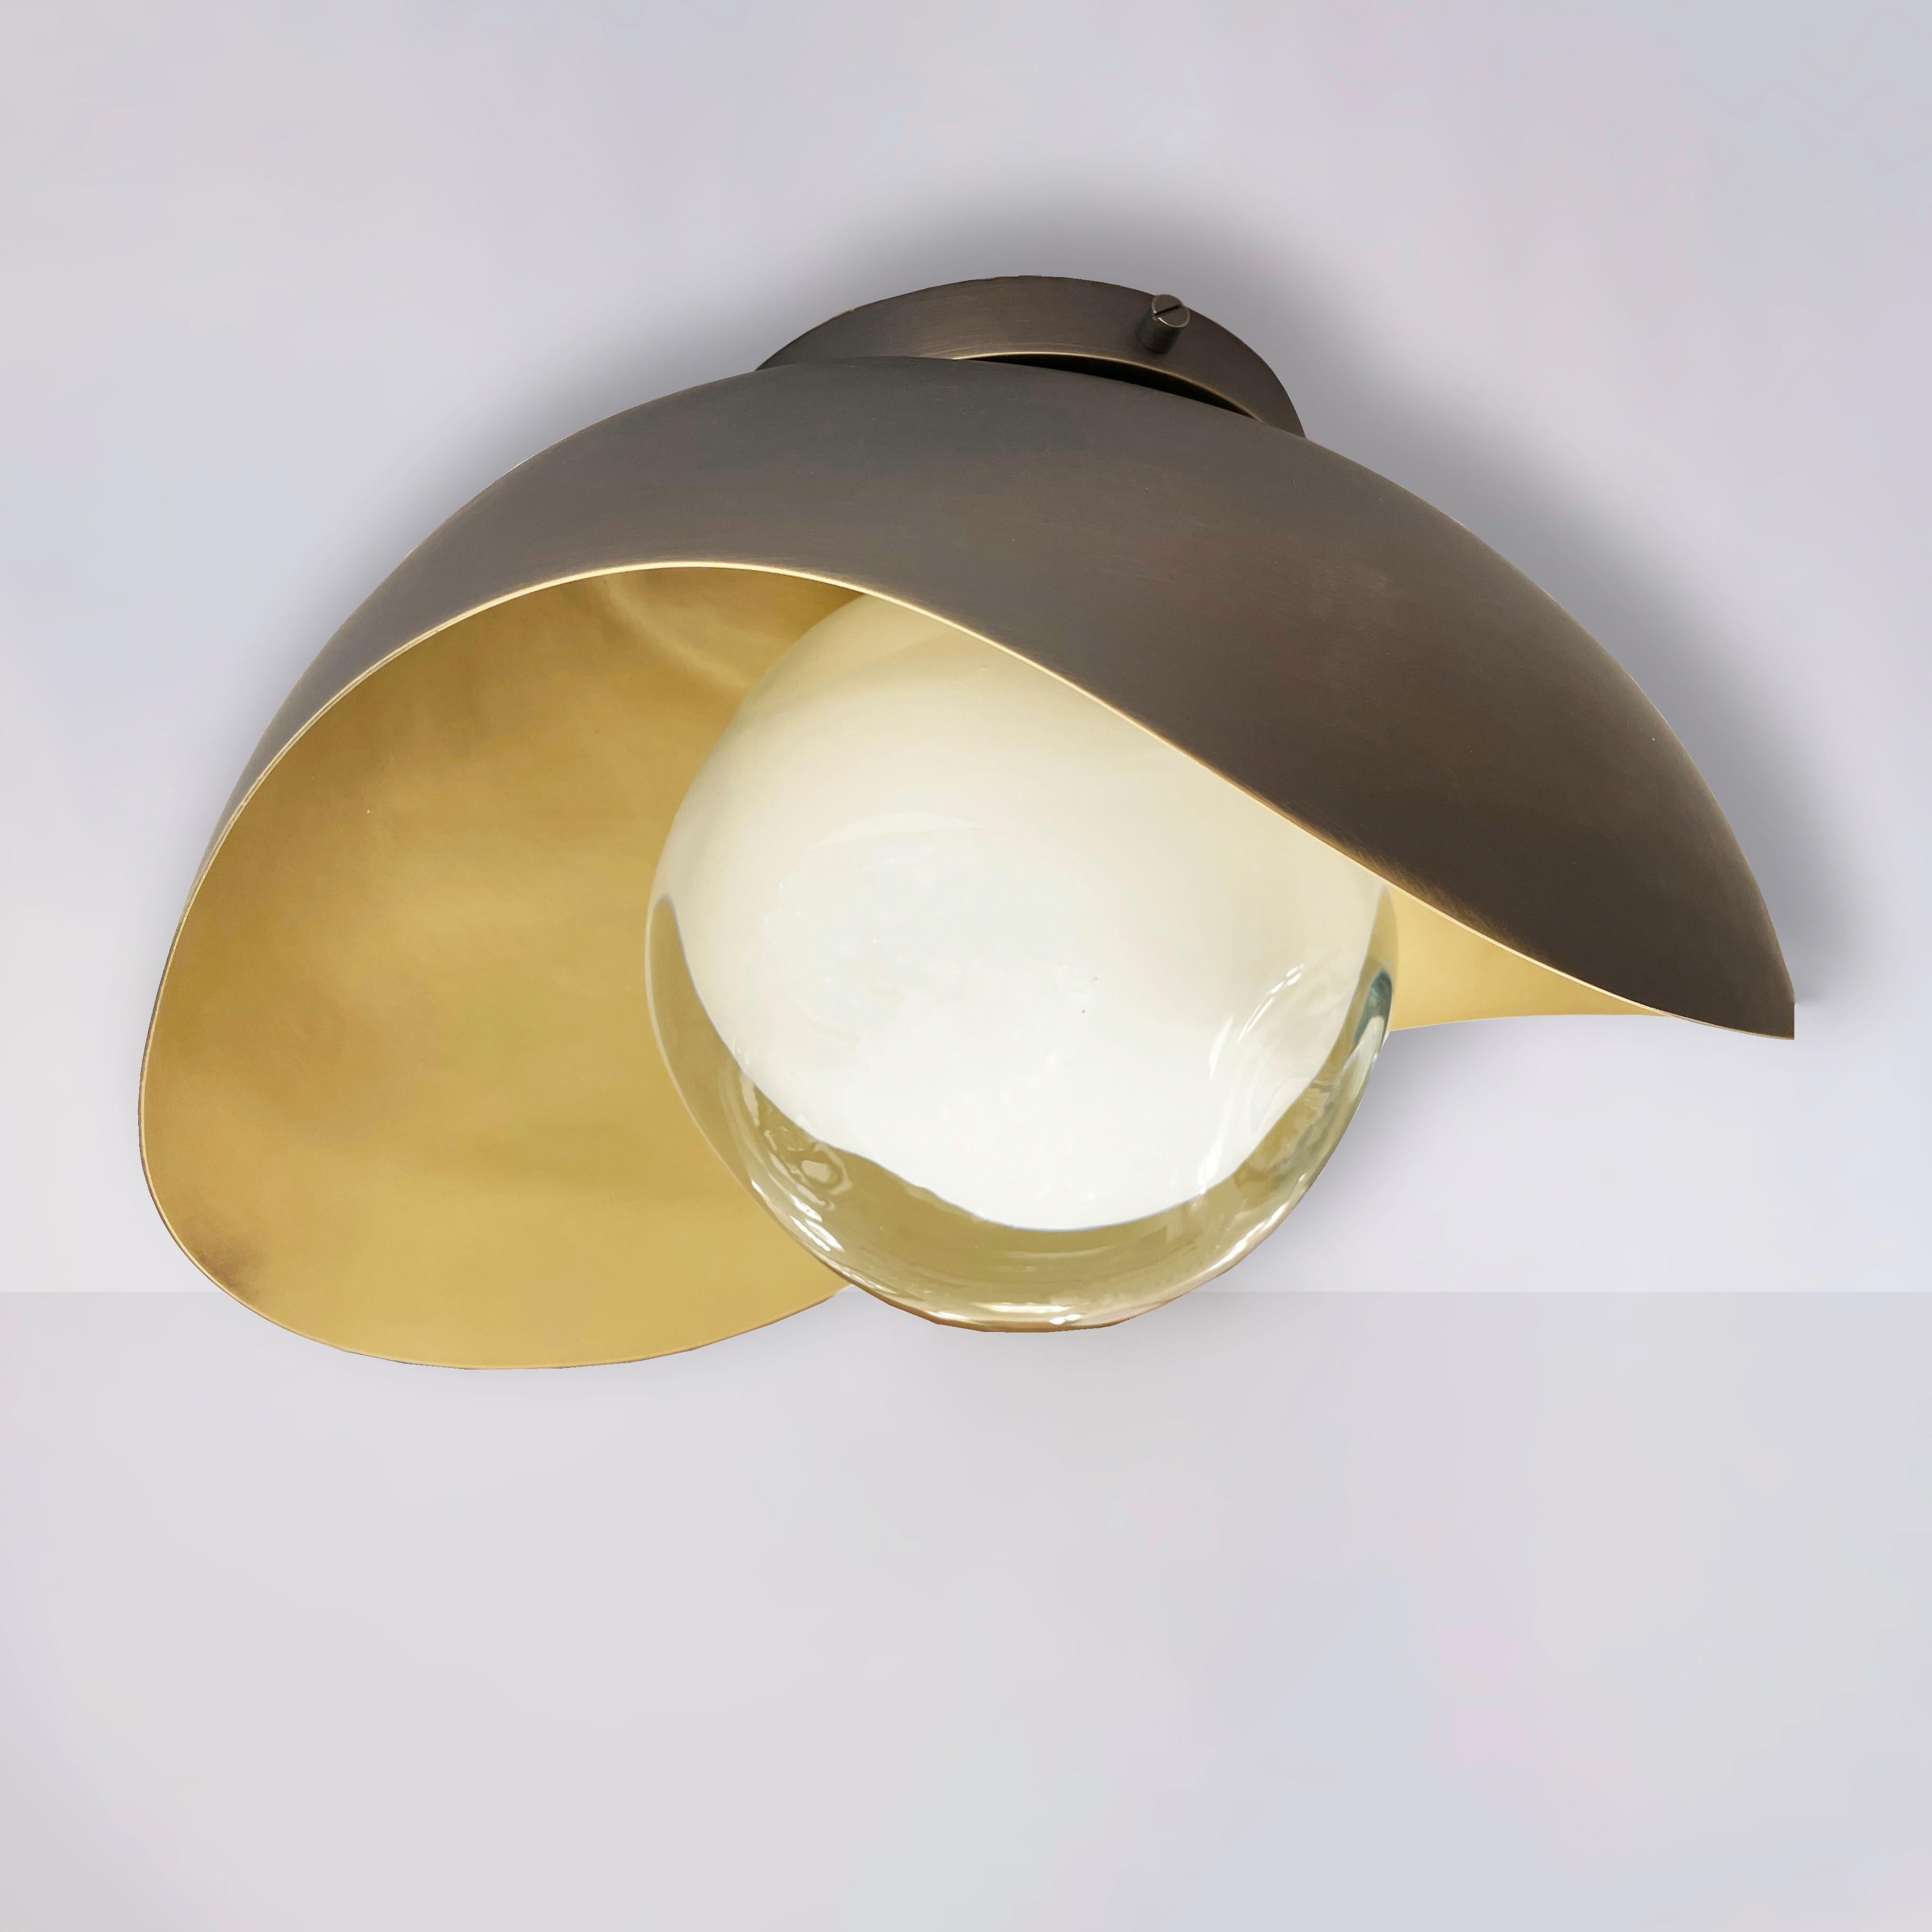 Perla Flushmount Ceiling Light by Gaspare Asaro-Satin Brass/Polished Nickel For Sale 6